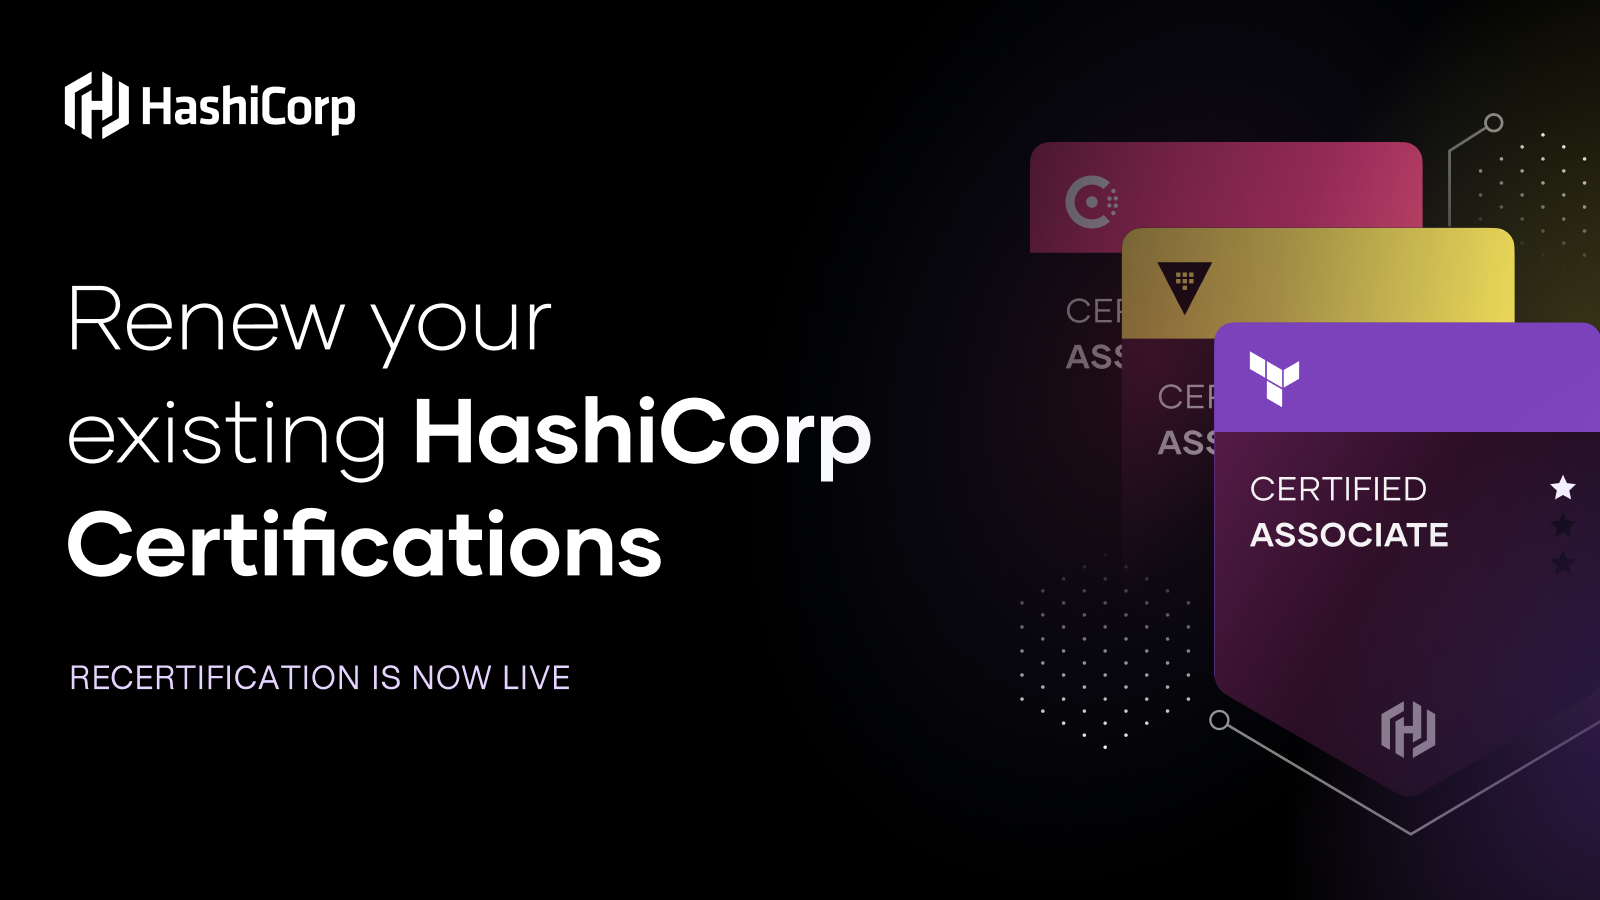 Renew your existing HashiCorp Certifications